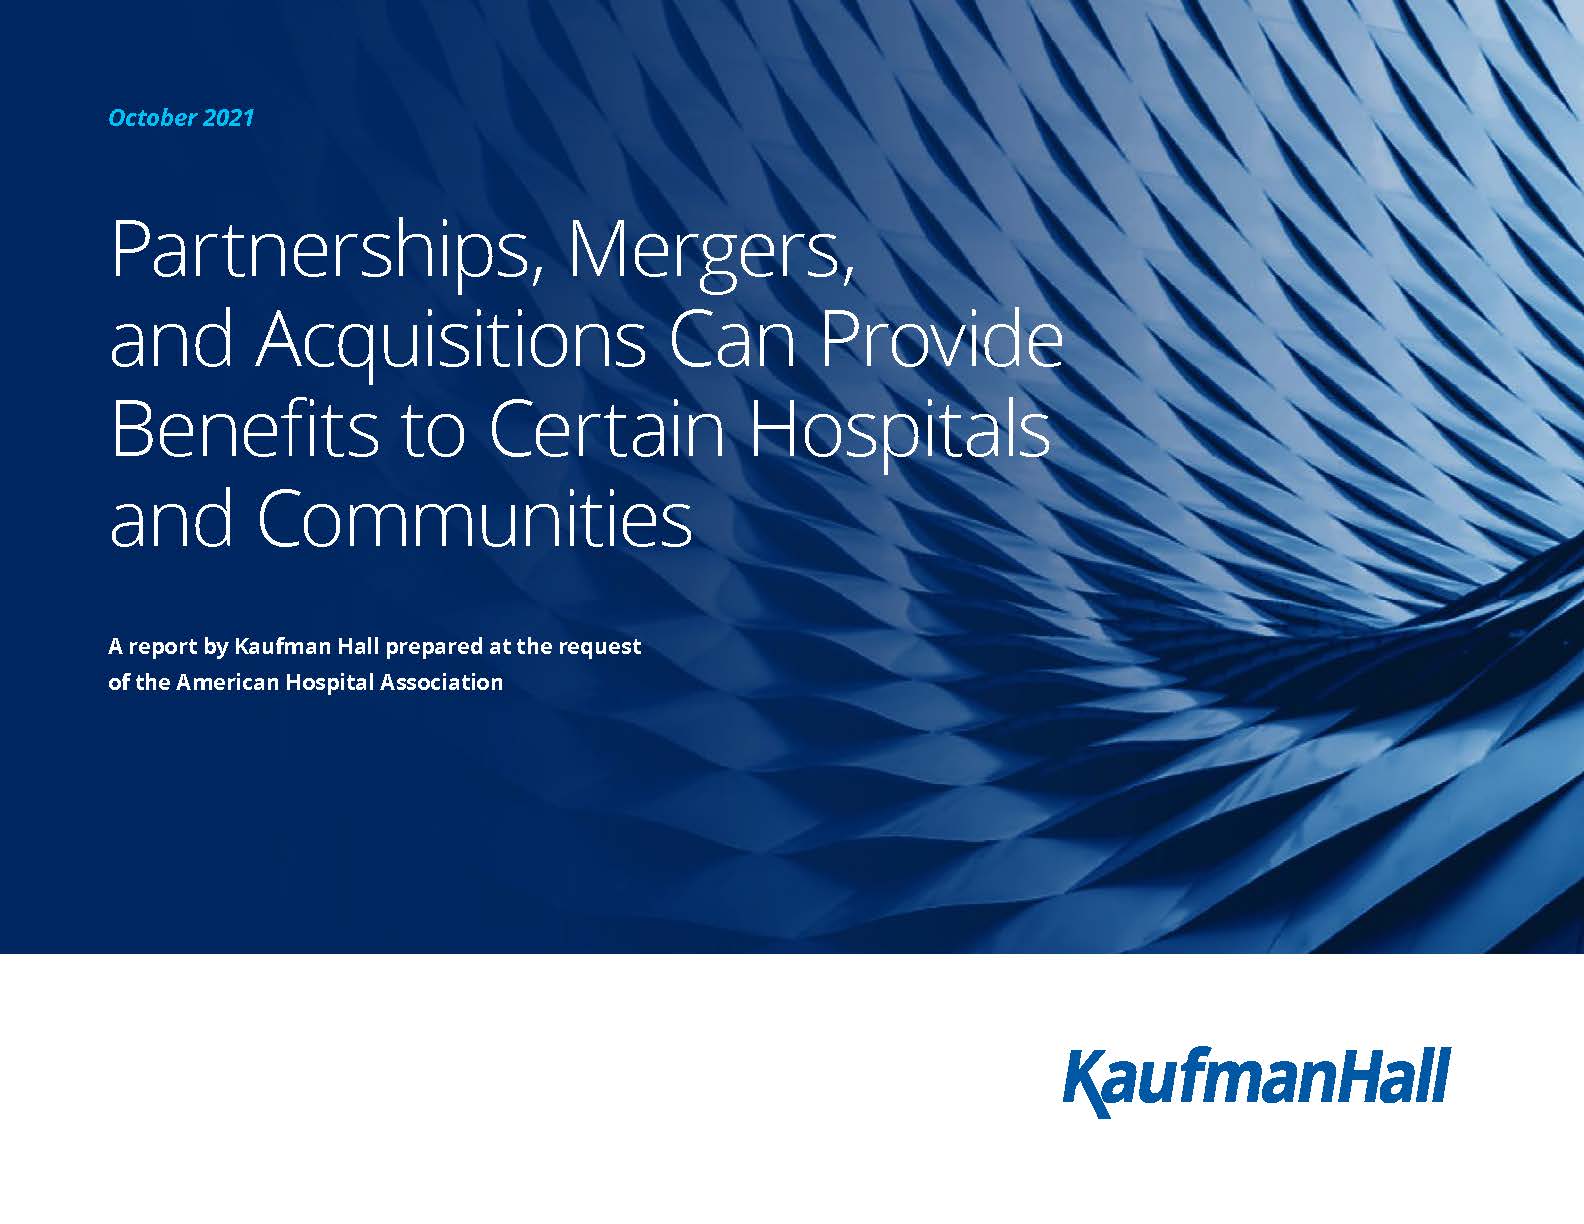 Partnerships, Mergers, and Acquisitions Can Provide Benefits to Certain Hospitals and Communities cover.